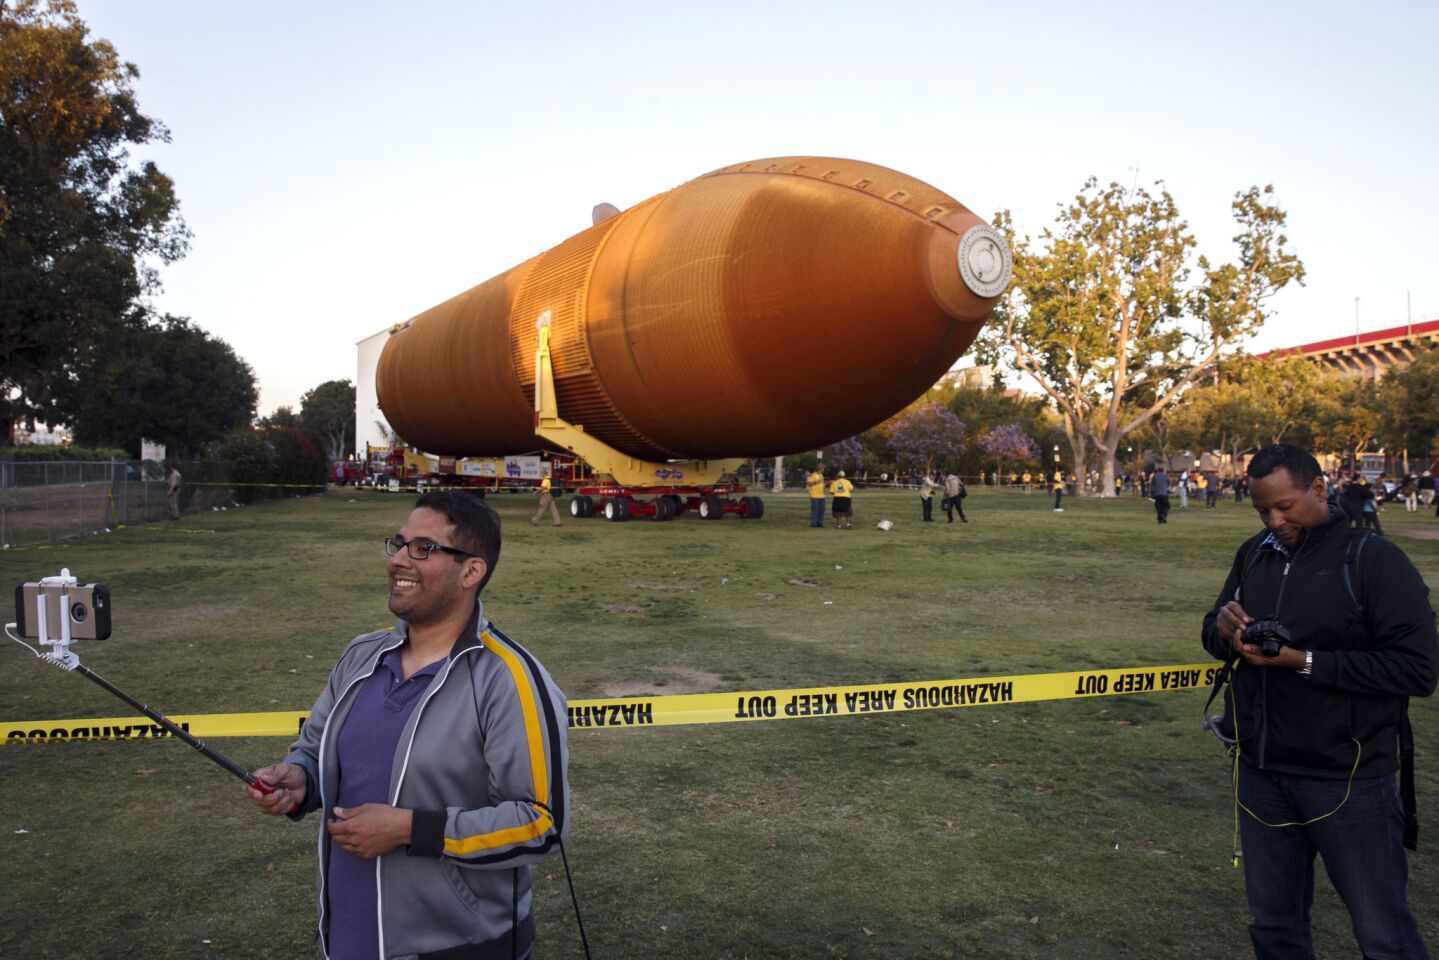 The ET-94 fuel tank rests outside the California Science Center on Saturday.